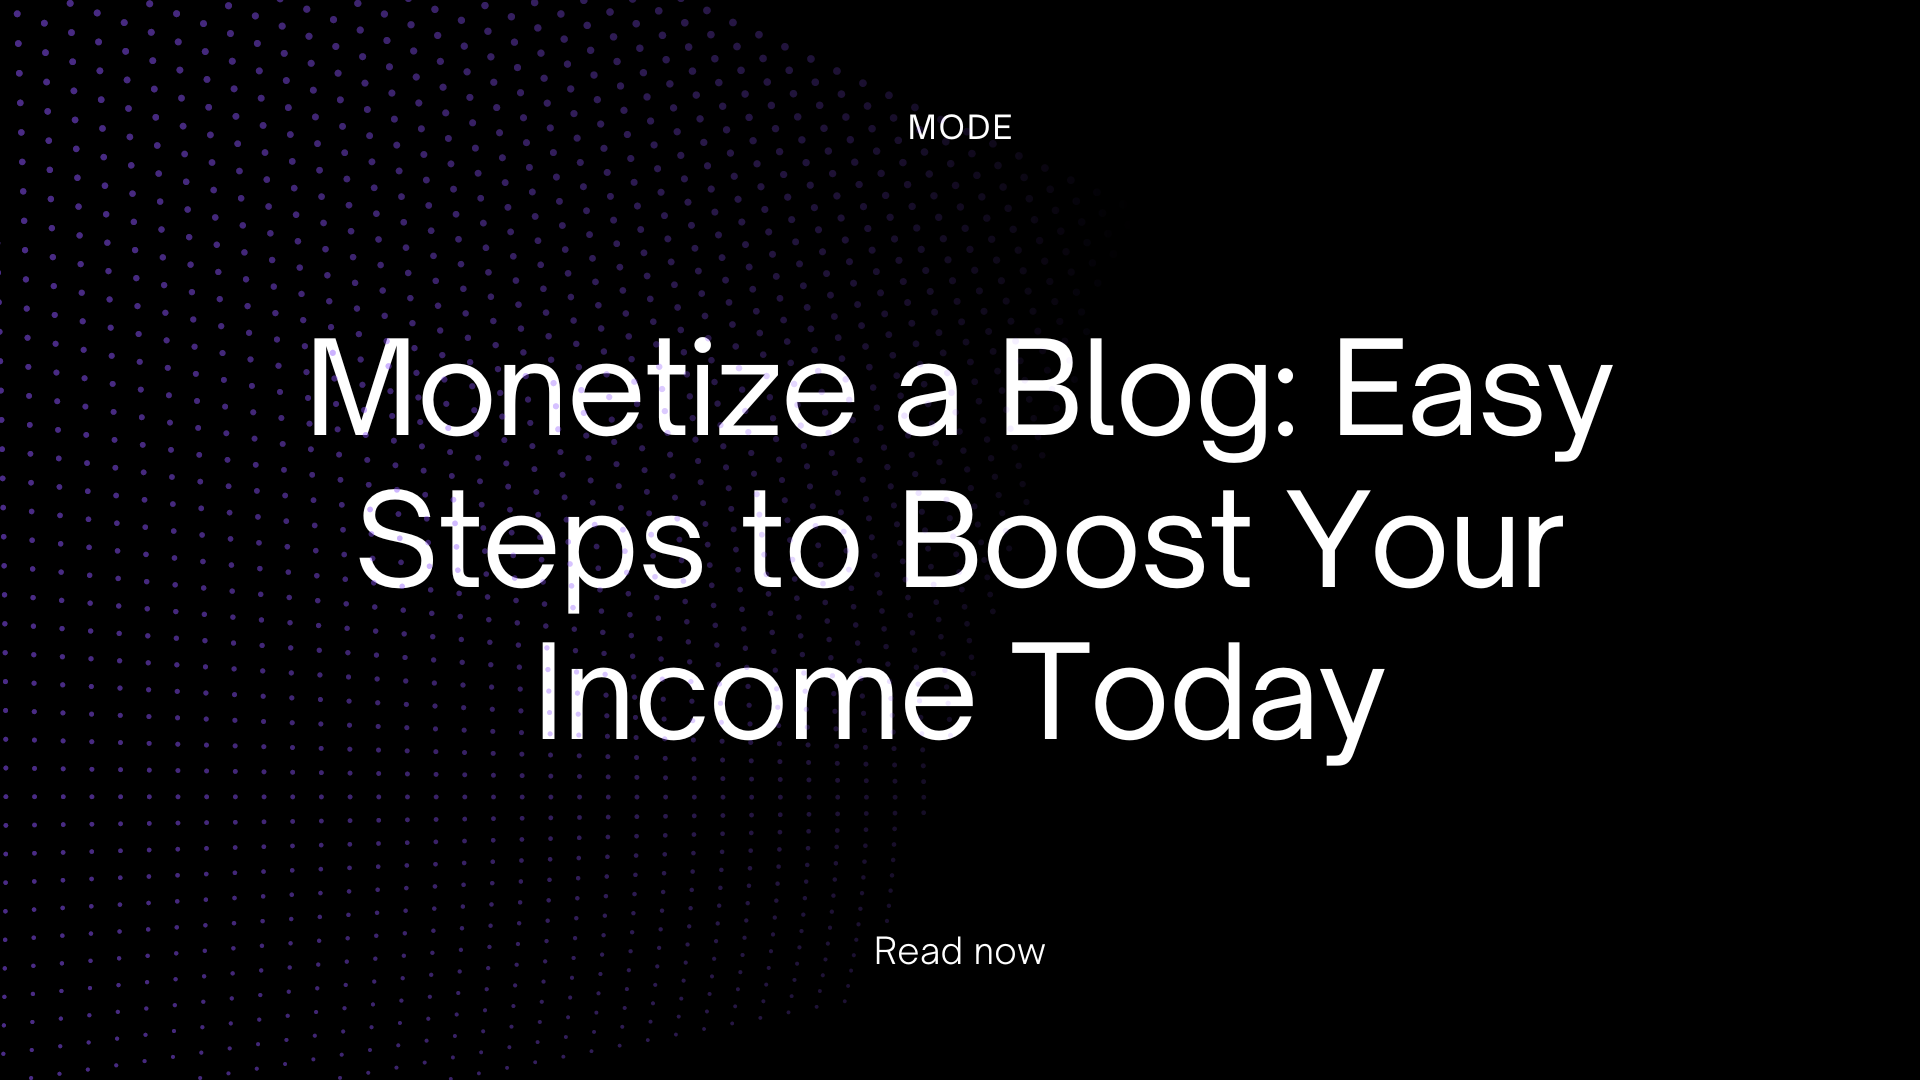 Monetize a Blog: Easy Steps to Boost Your Income Today